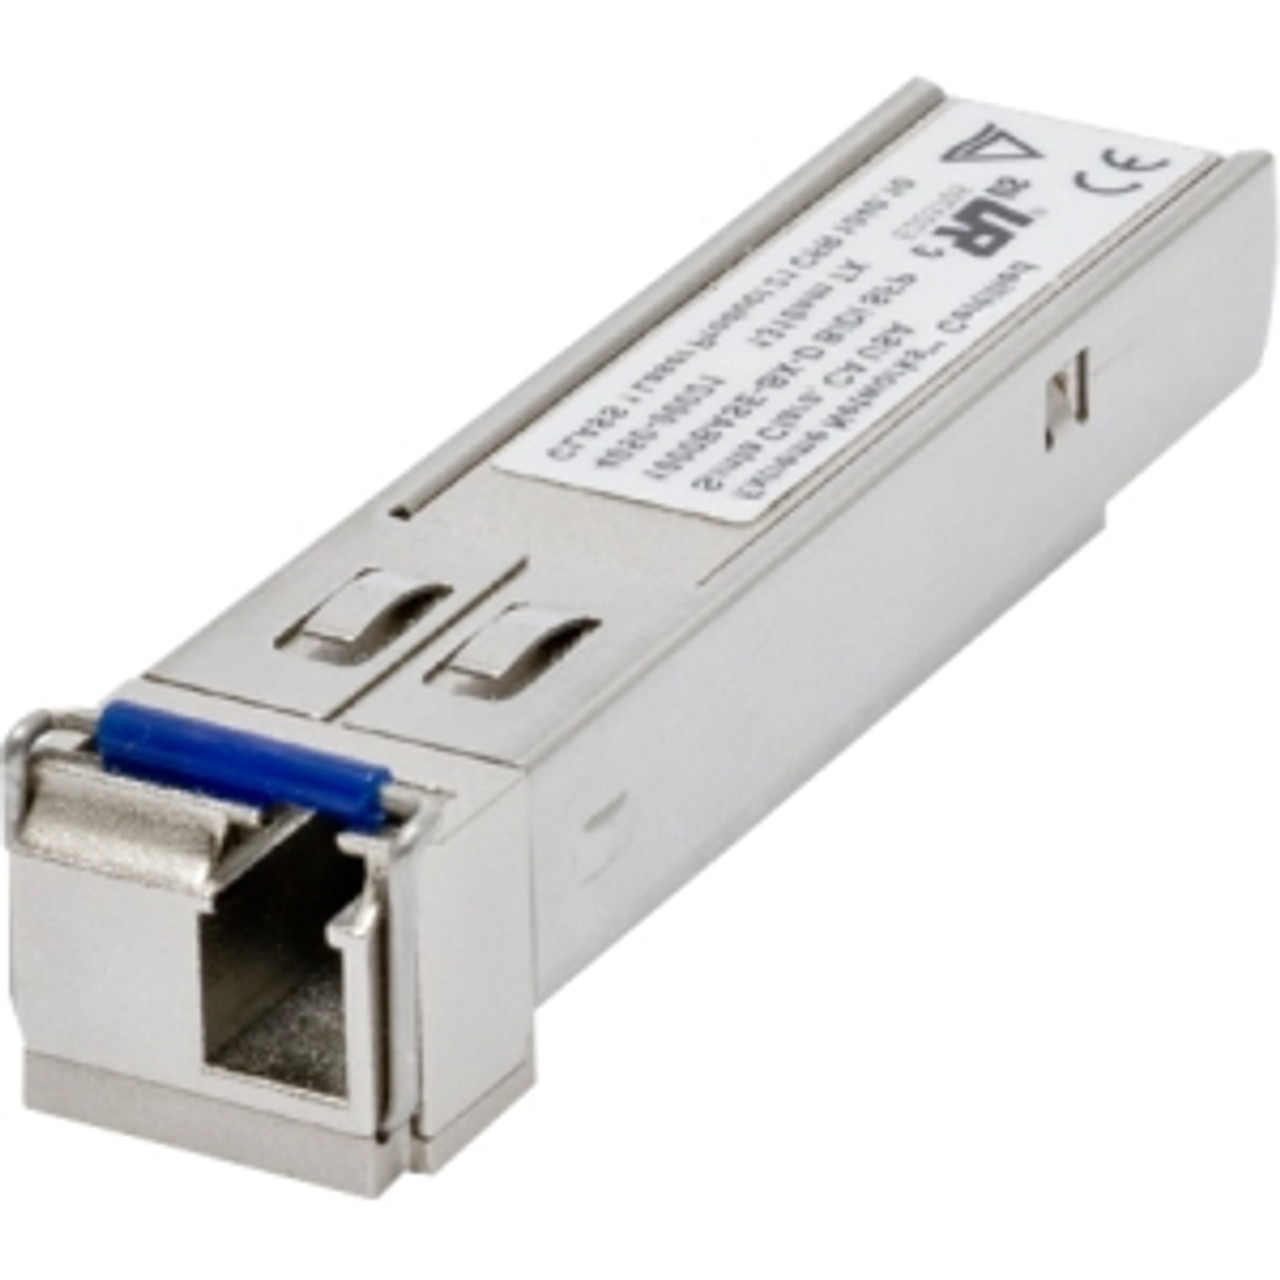 10057HC Extreme Networks 1.25Gbps 1000Base-BX-U Single-mode Fiber 10km 1310nmTX/1490nmRX LC Connector SFP Transceiver Module (Refurbished)